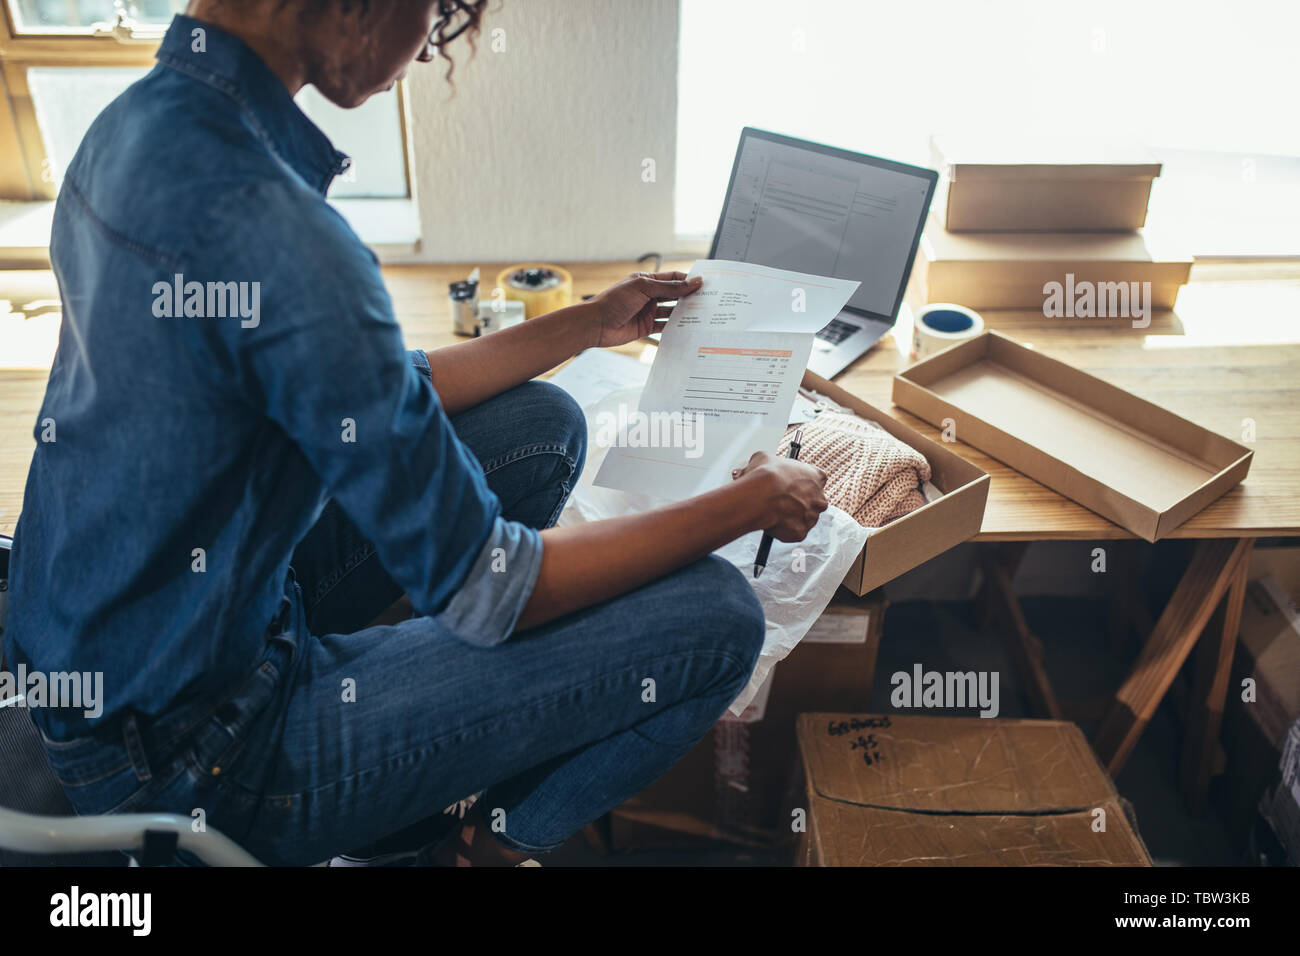 Female entrepreneur reading and verifying the invoice before shipping the product to the customer. Woman preparing shipment for delivery at her desk. Stock Photo